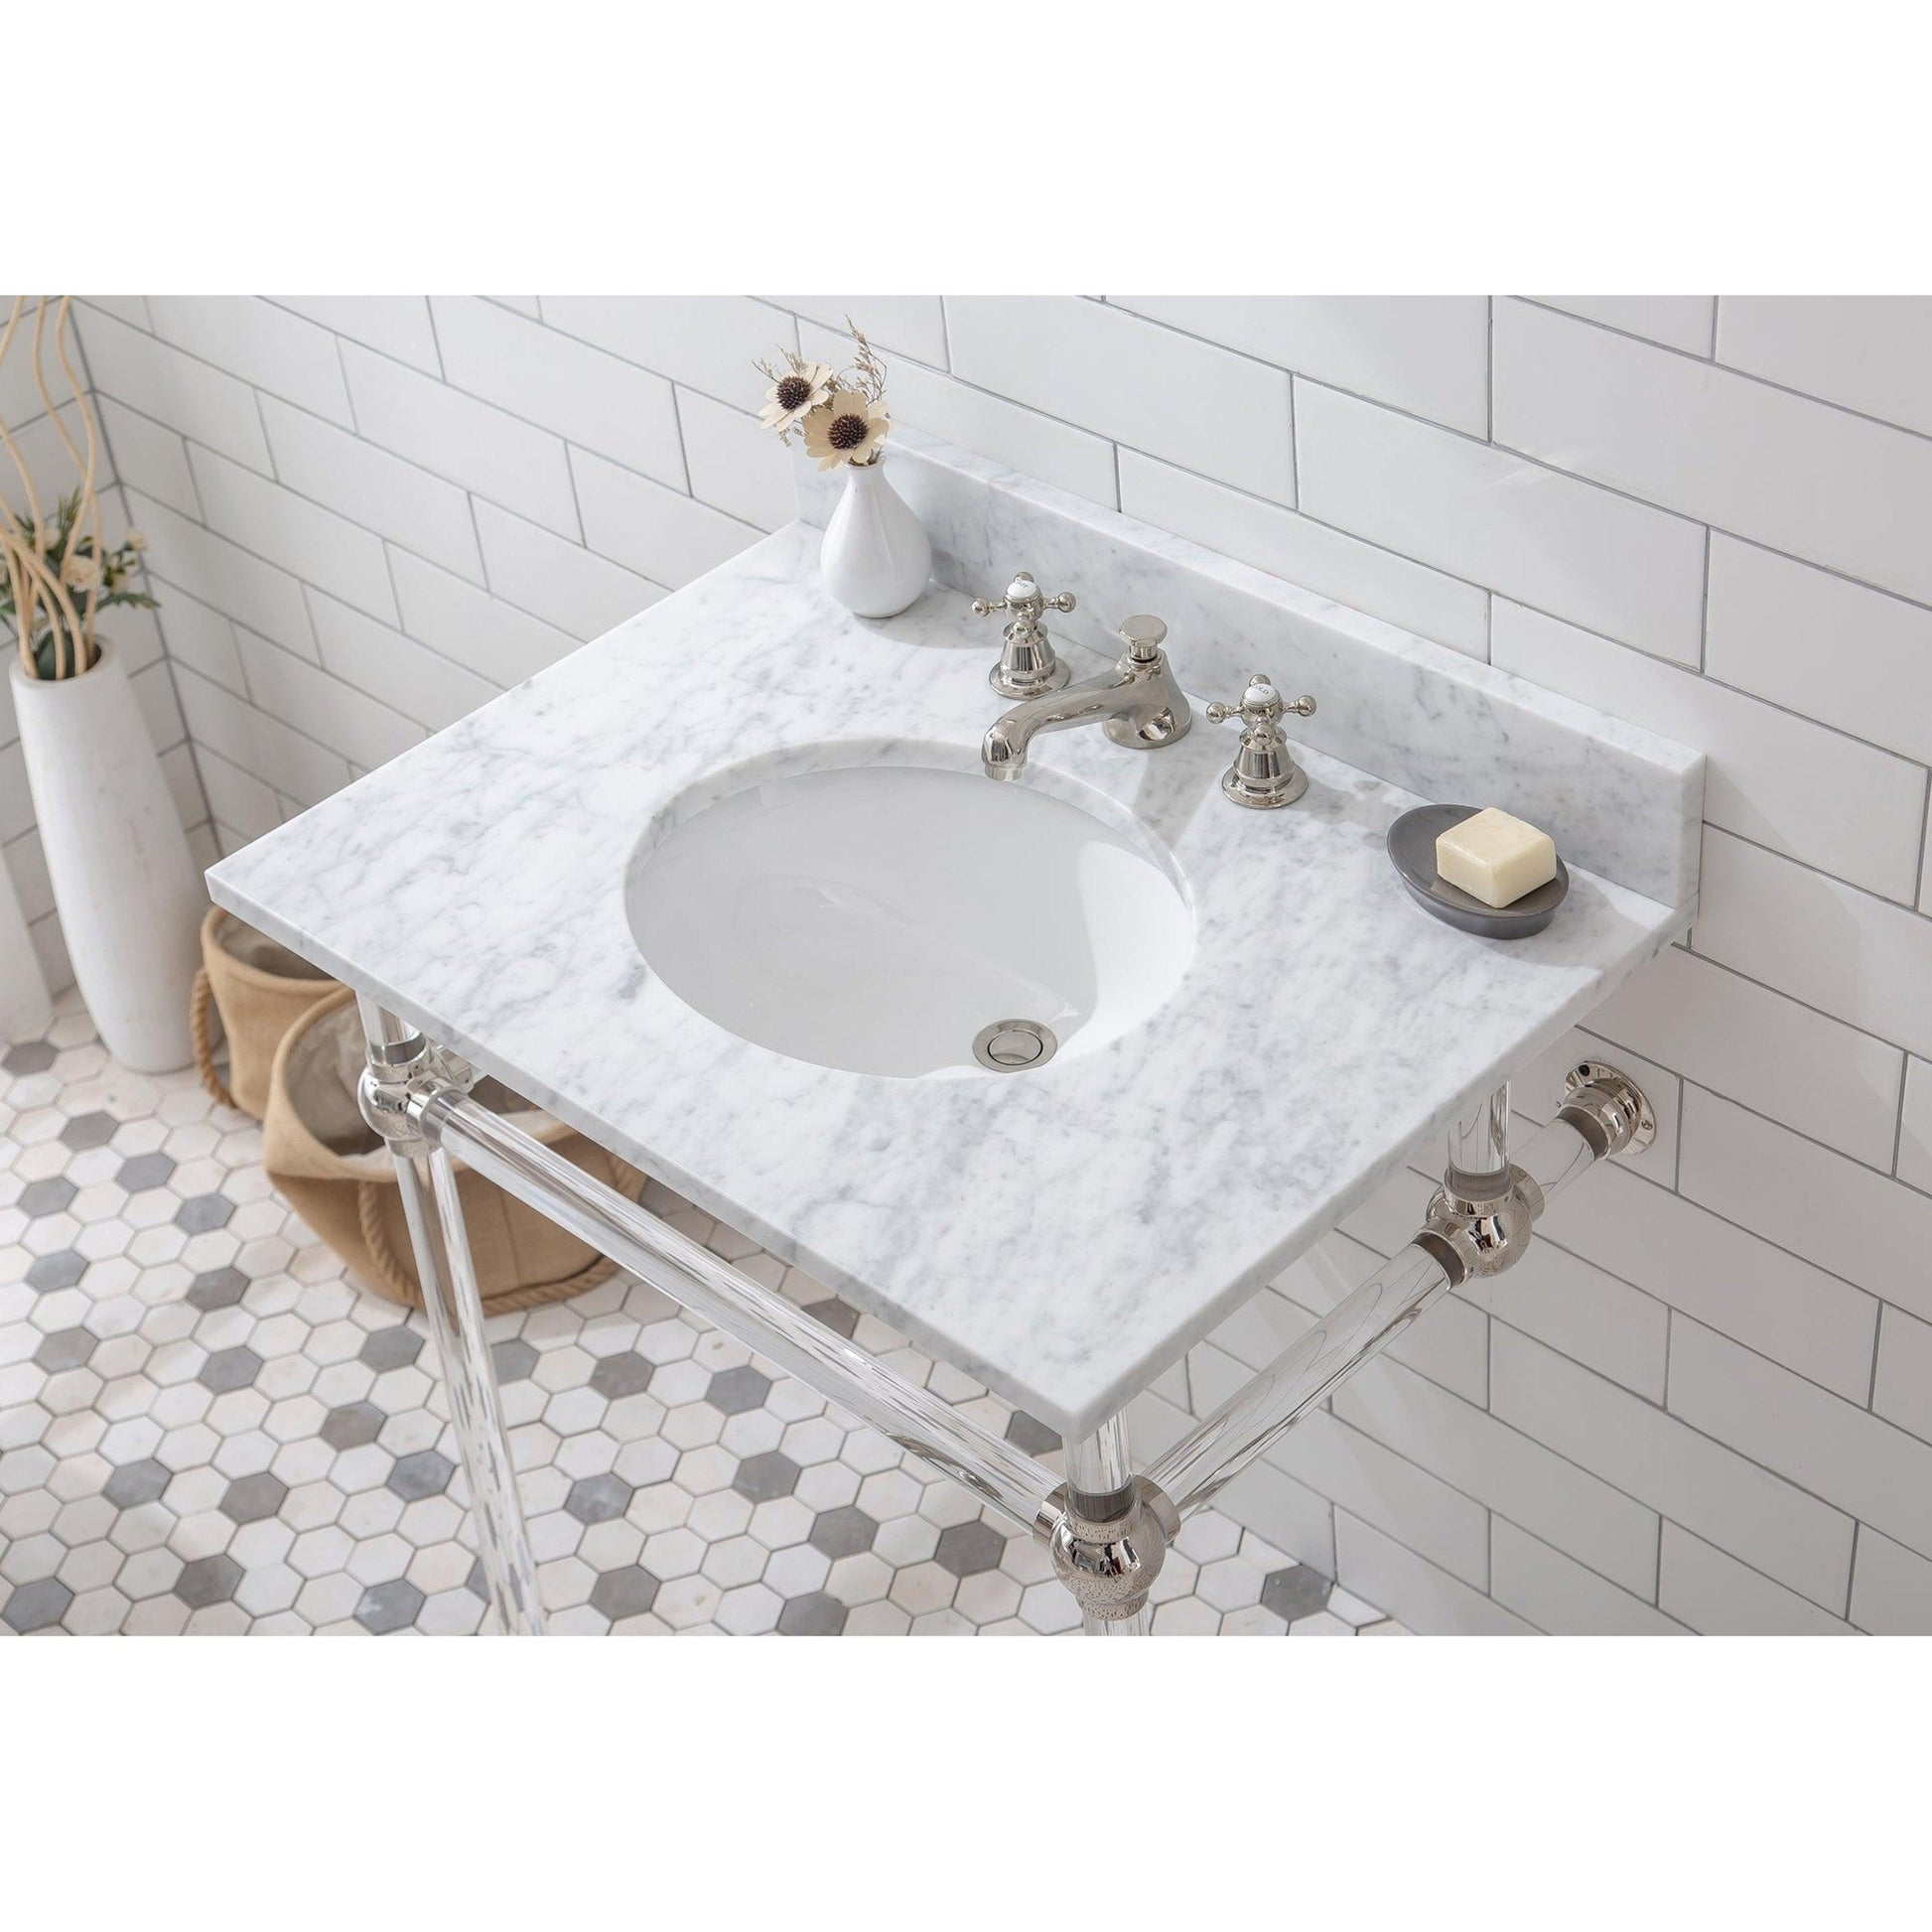 Water Creation Empire 30" Wide Single Wash Stand, P-Trap, and Counter Top with Basin included in Polished Nickel (PVD) Finish